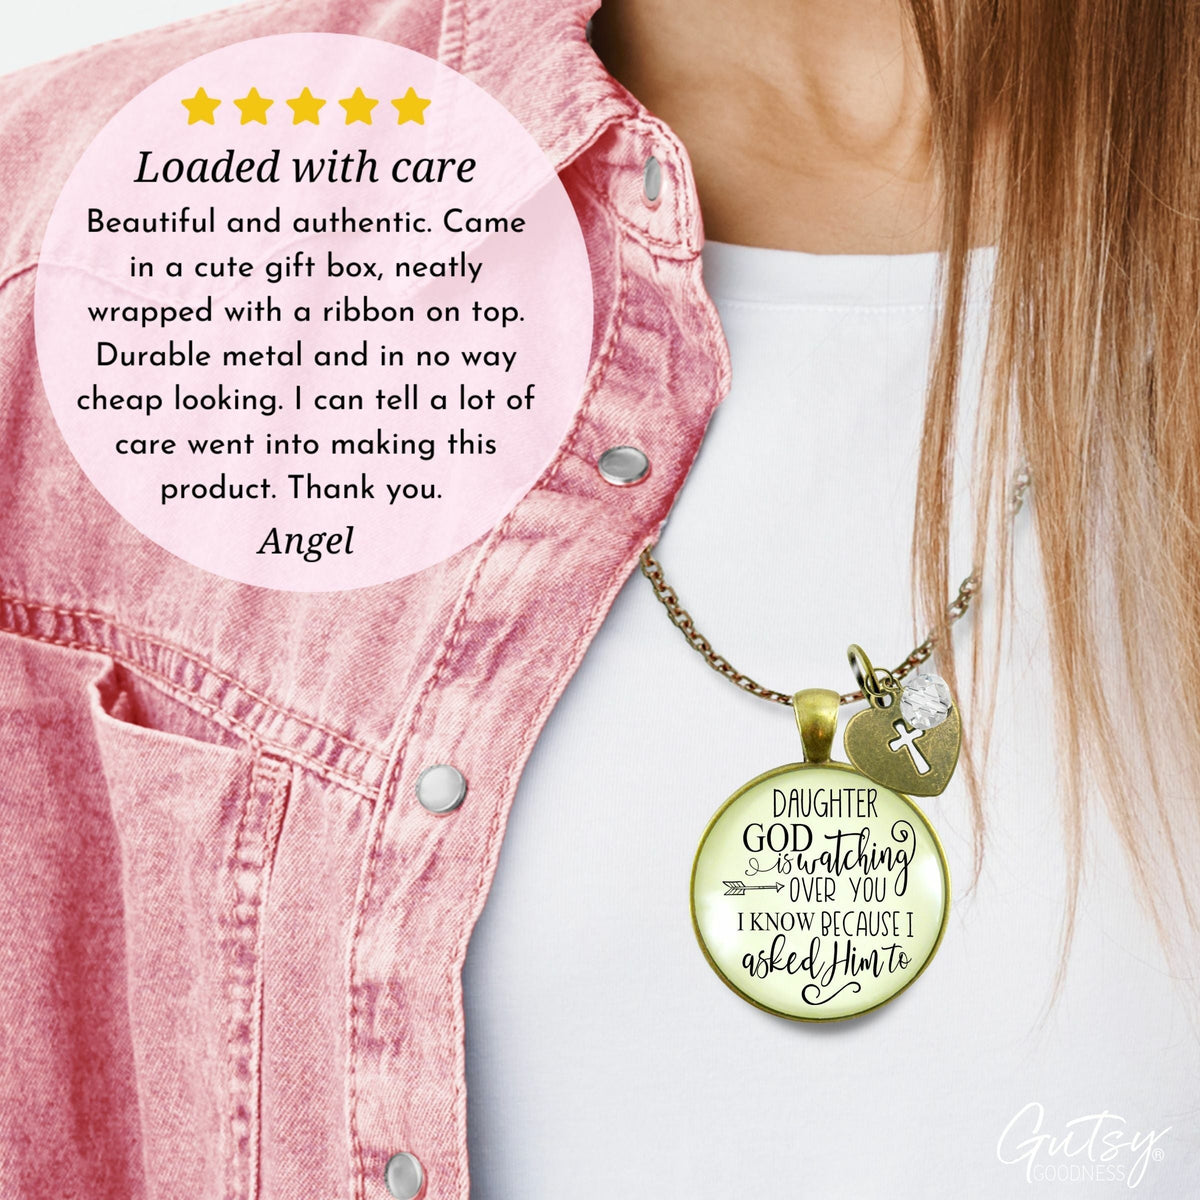 Gutsy Goodness To Daughter Necklace He is Watching Over You Love From Mom Jewelry Gift - Gutsy Goodness Handmade Jewelry;To Daughter Necklace He Is Watching Over You Love From Mom Jewelry Gift - Gutsy Goodness Handmade Jewelry Gifts